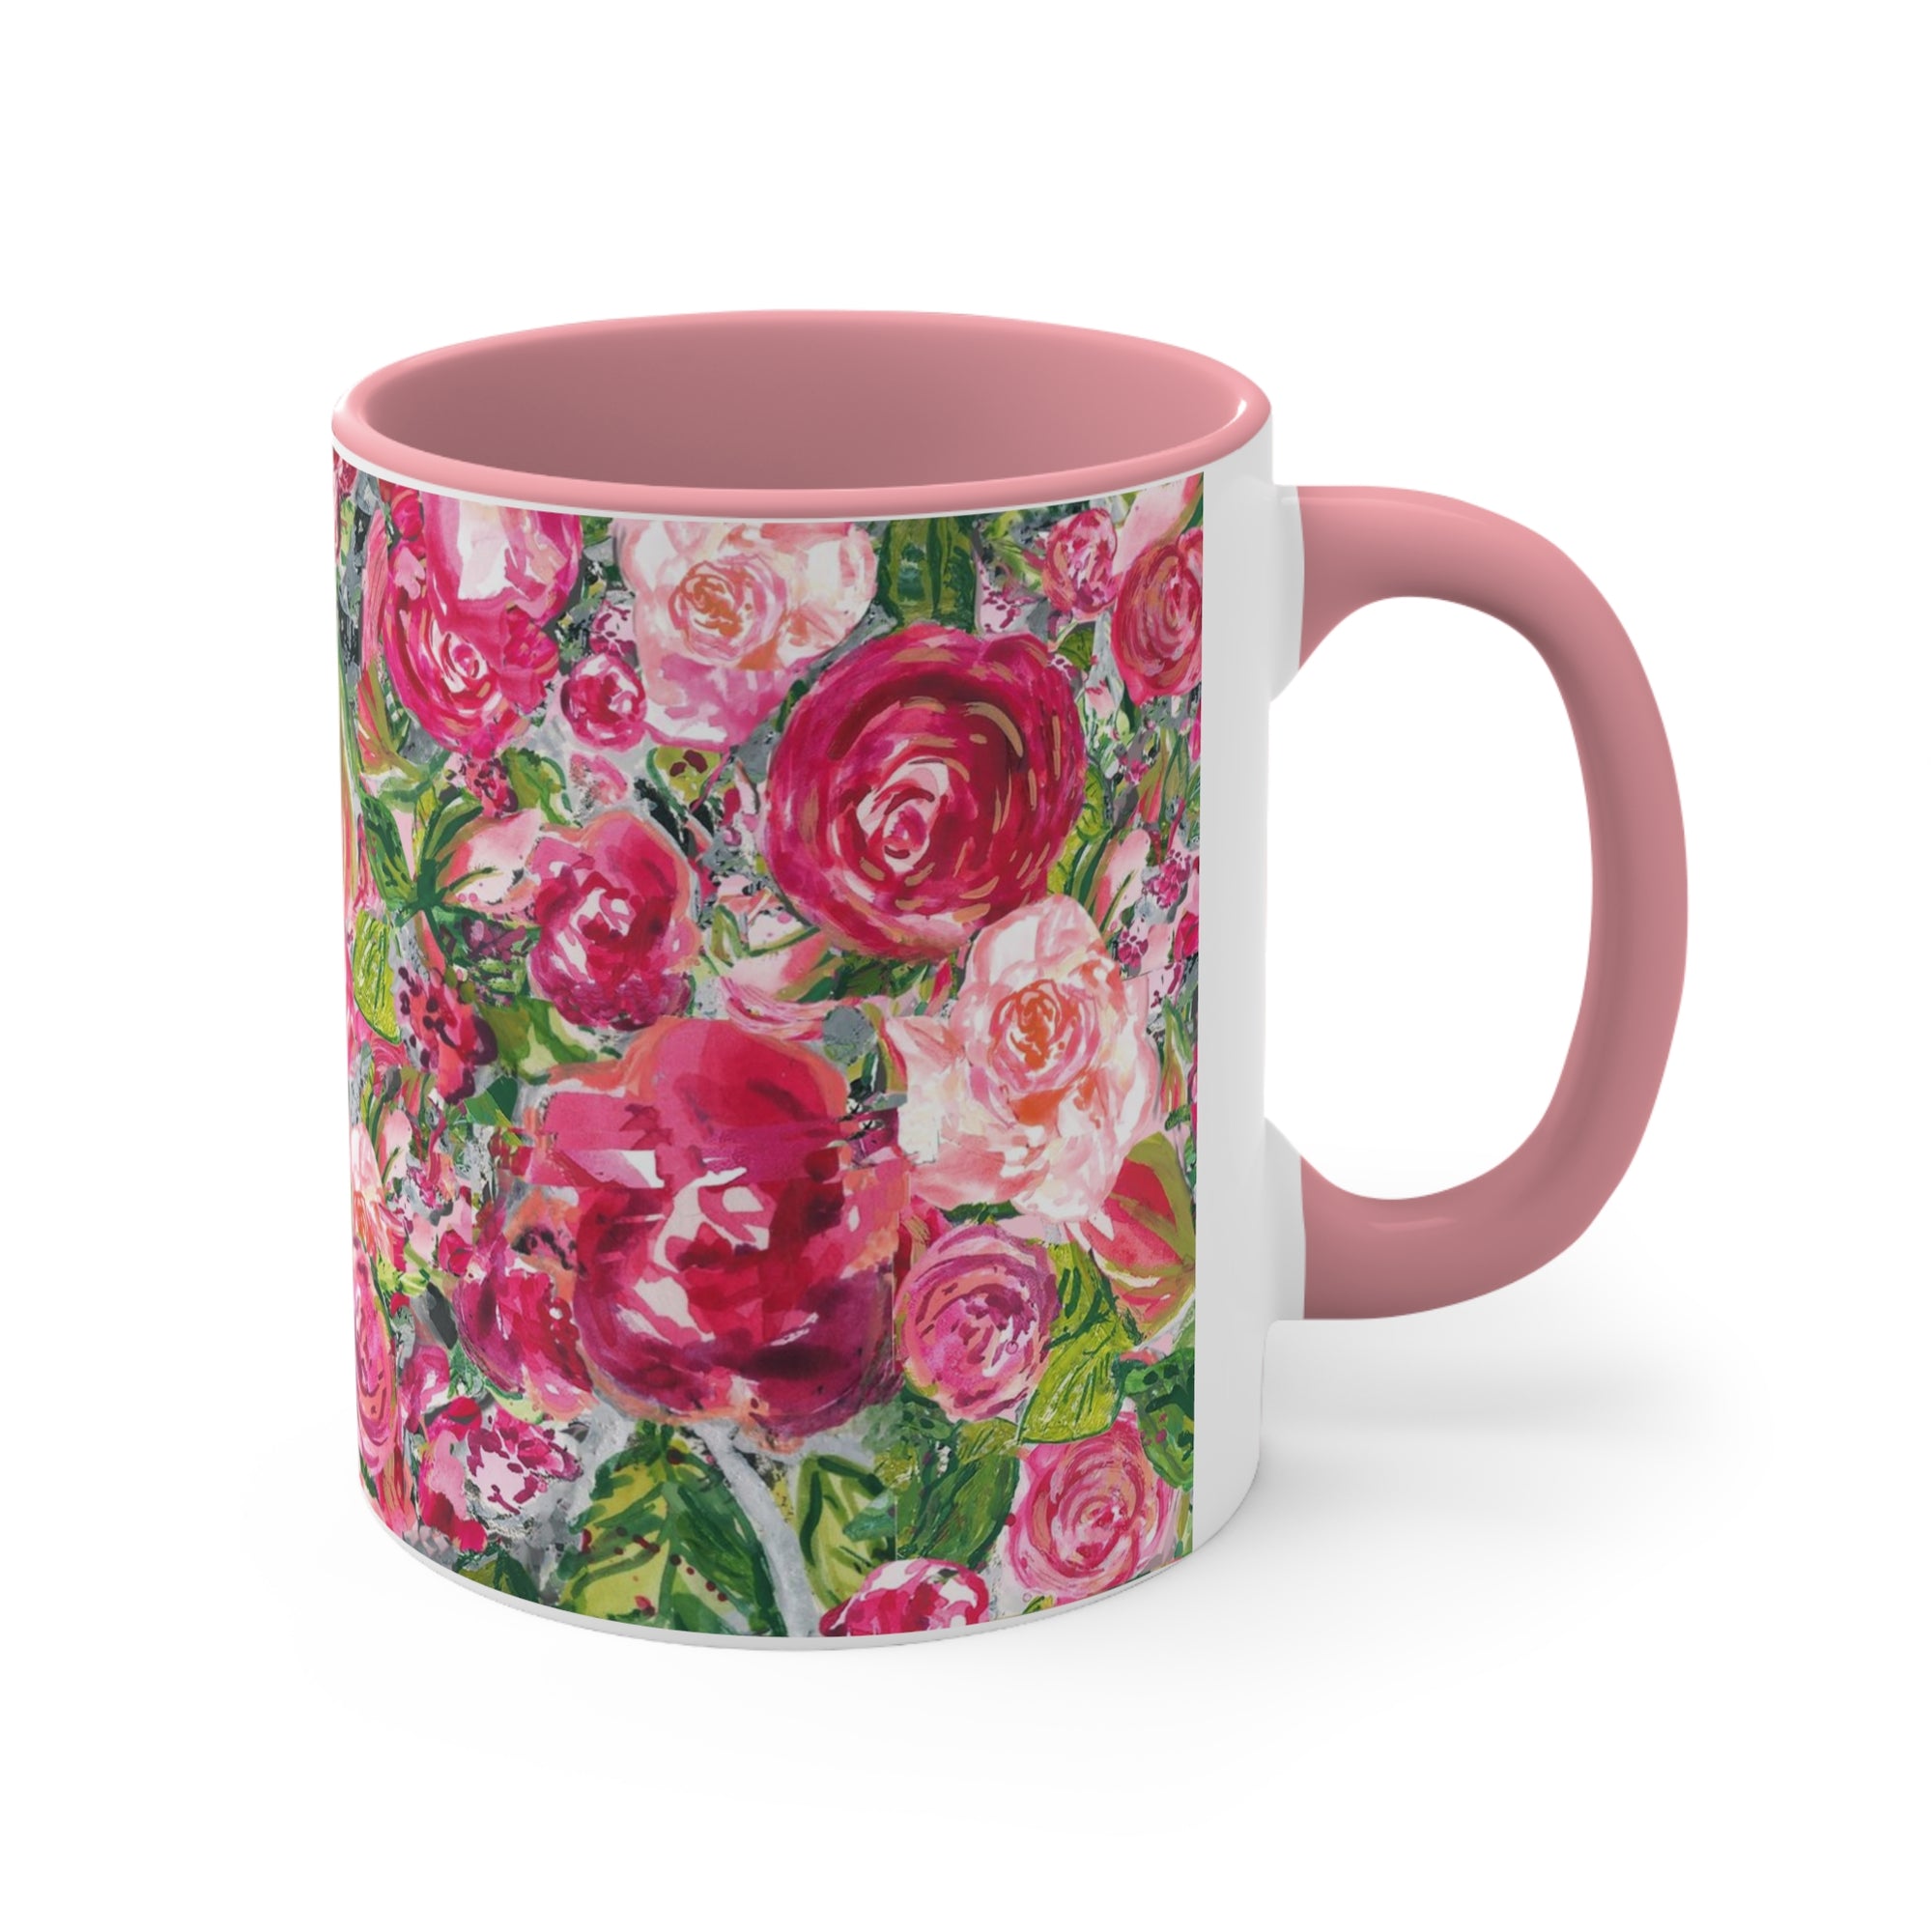 Beautiful Roses Coffee Mug in either Pink or Red Handle Interior Accents, 11oz